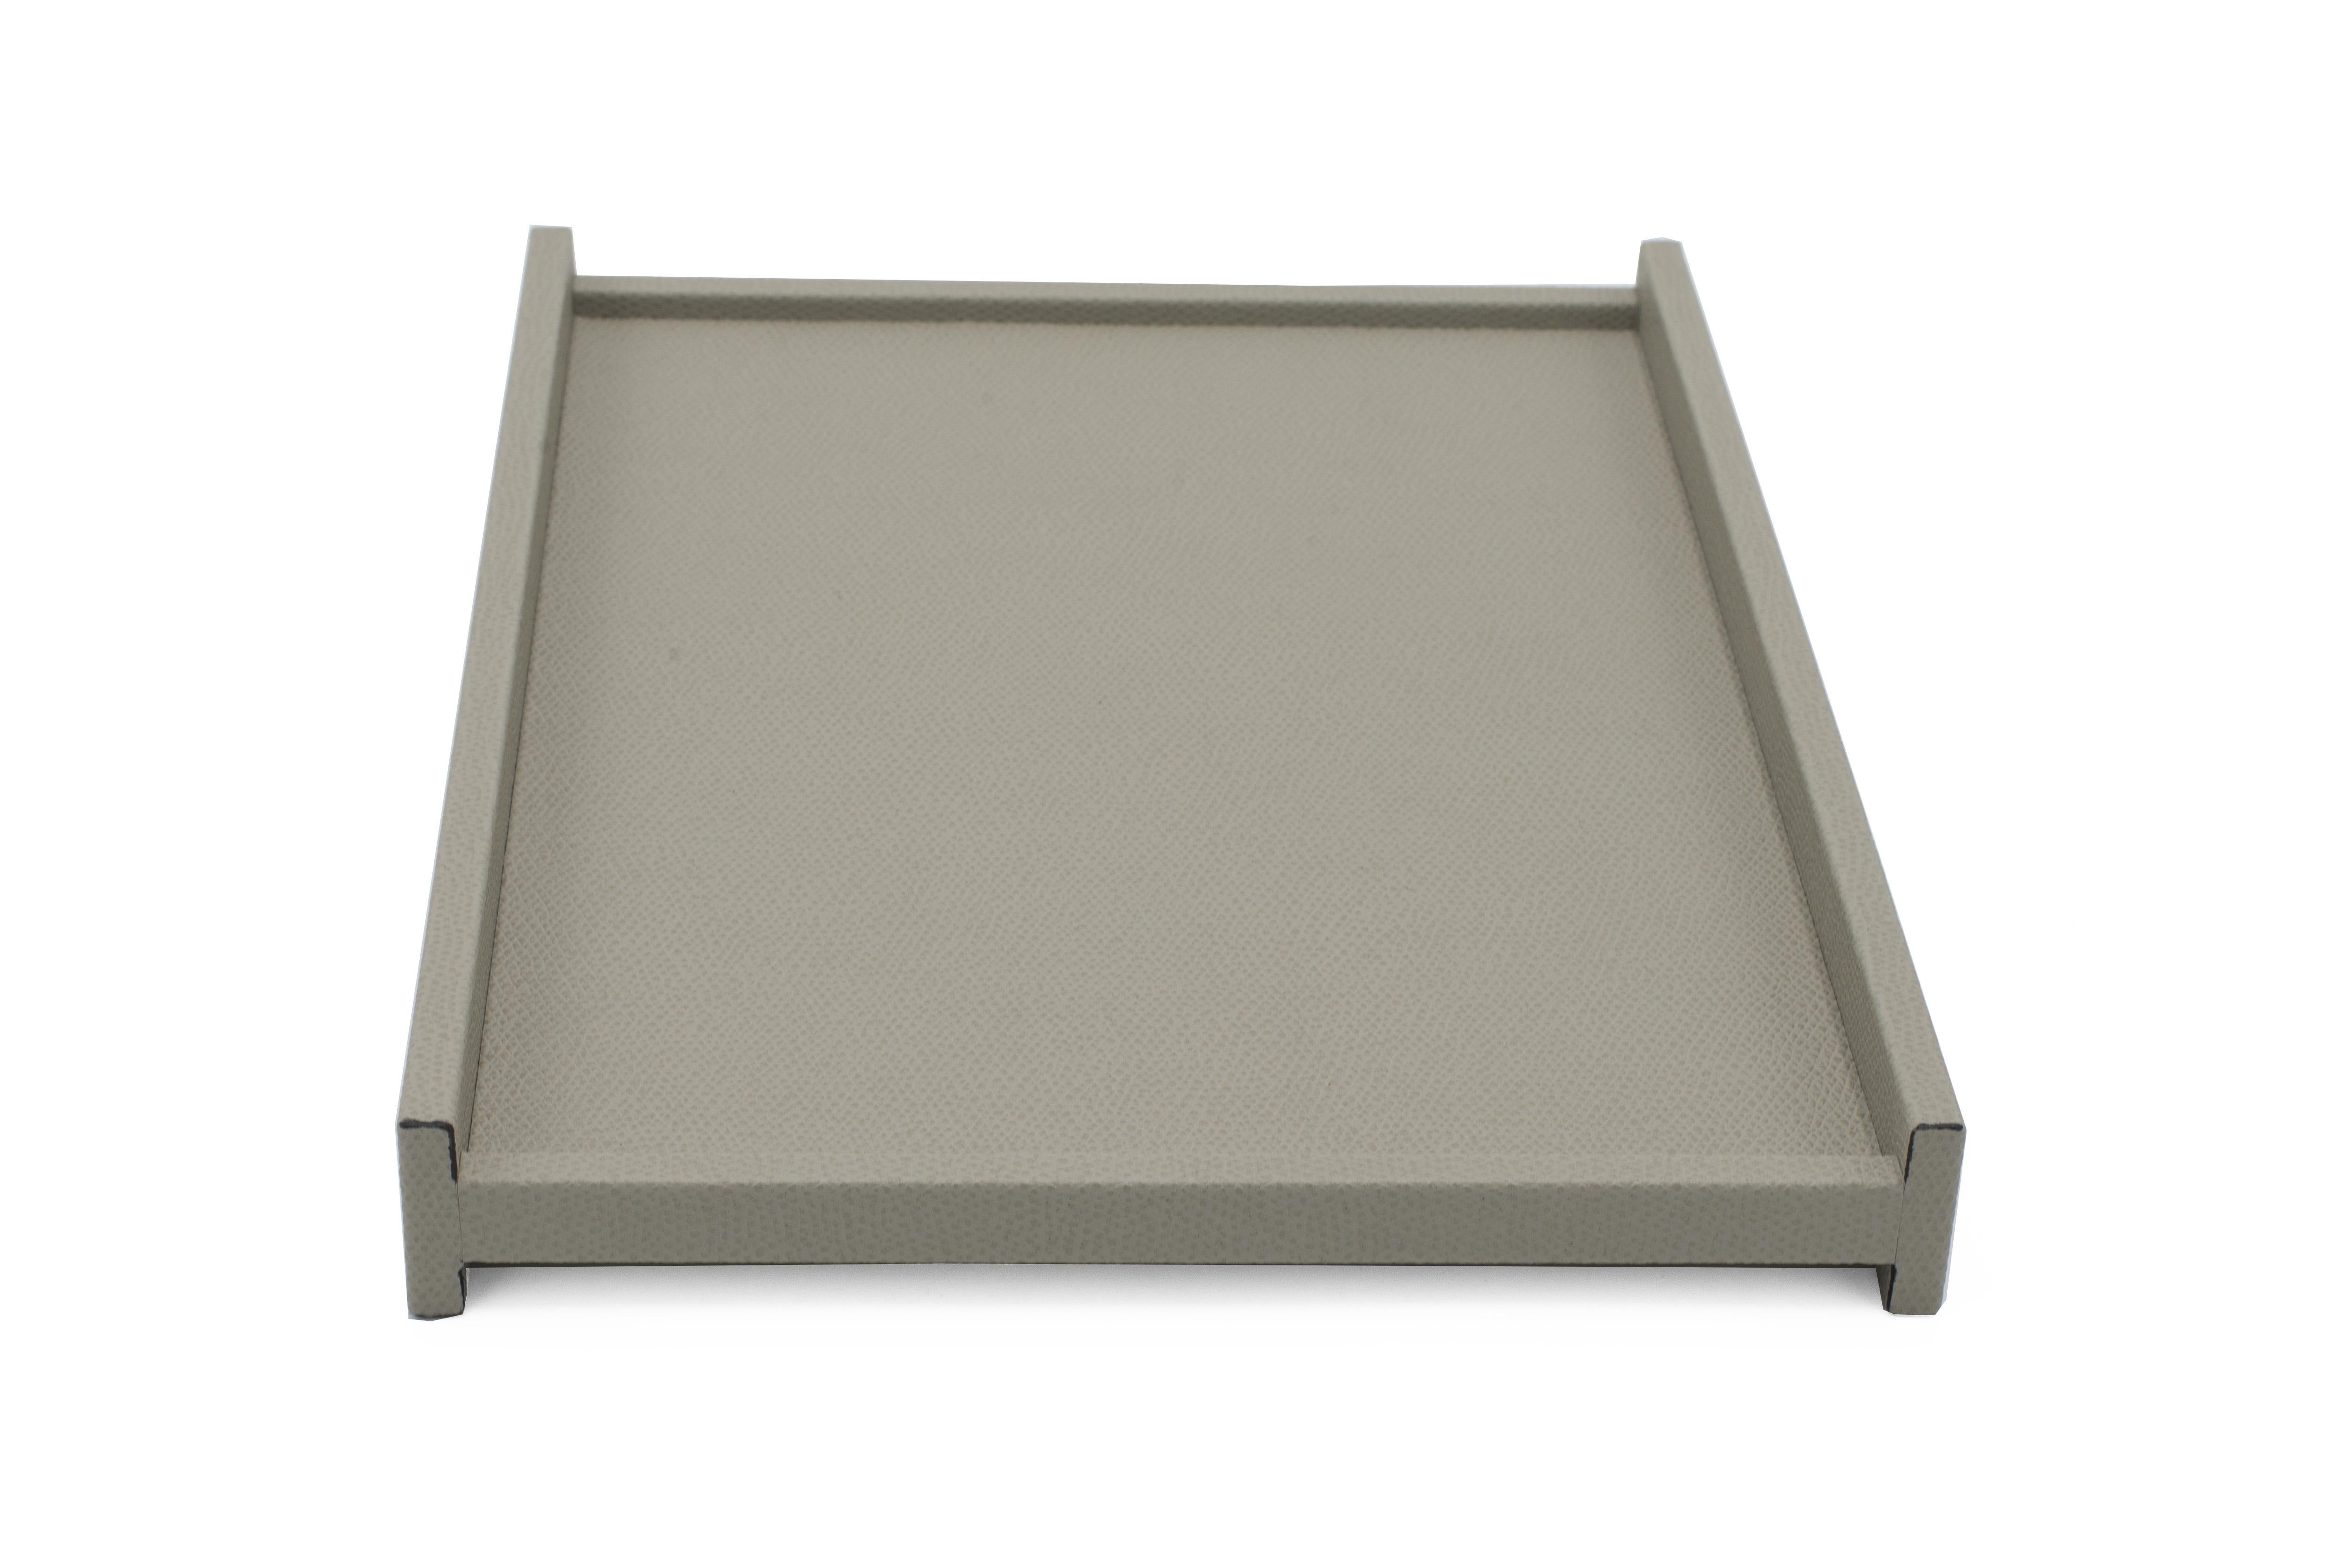 Contemporary rectangular gray calfskin valet tray with two low sides and two taller sides (Made in Italy).